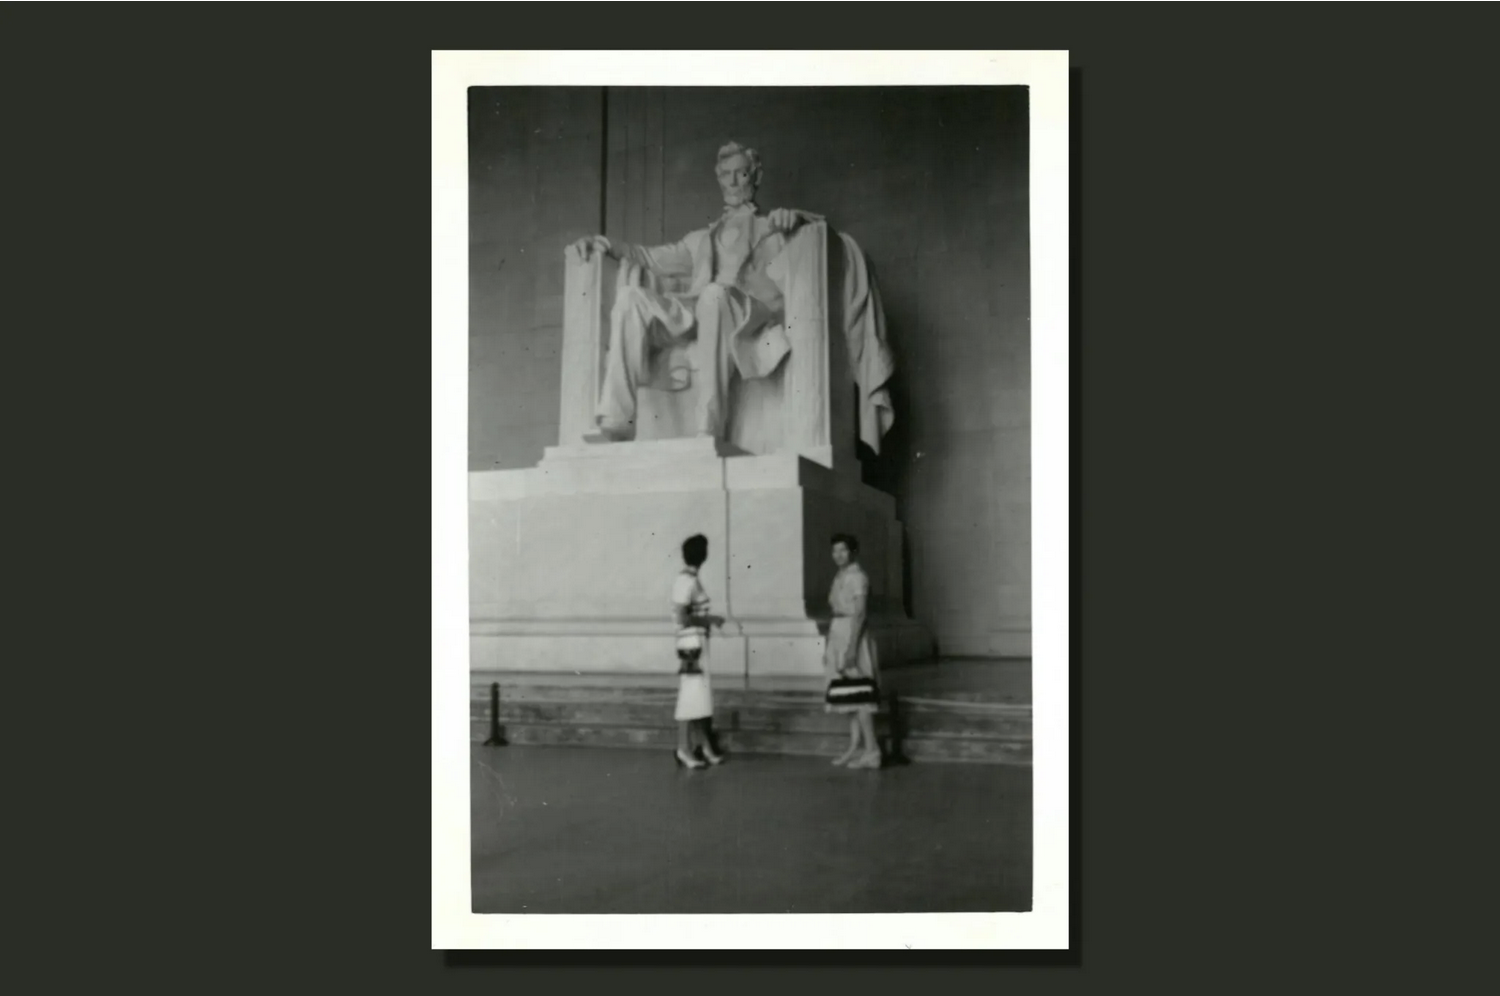 untitled 1960s photo of Abraham Lincoln Memorial 